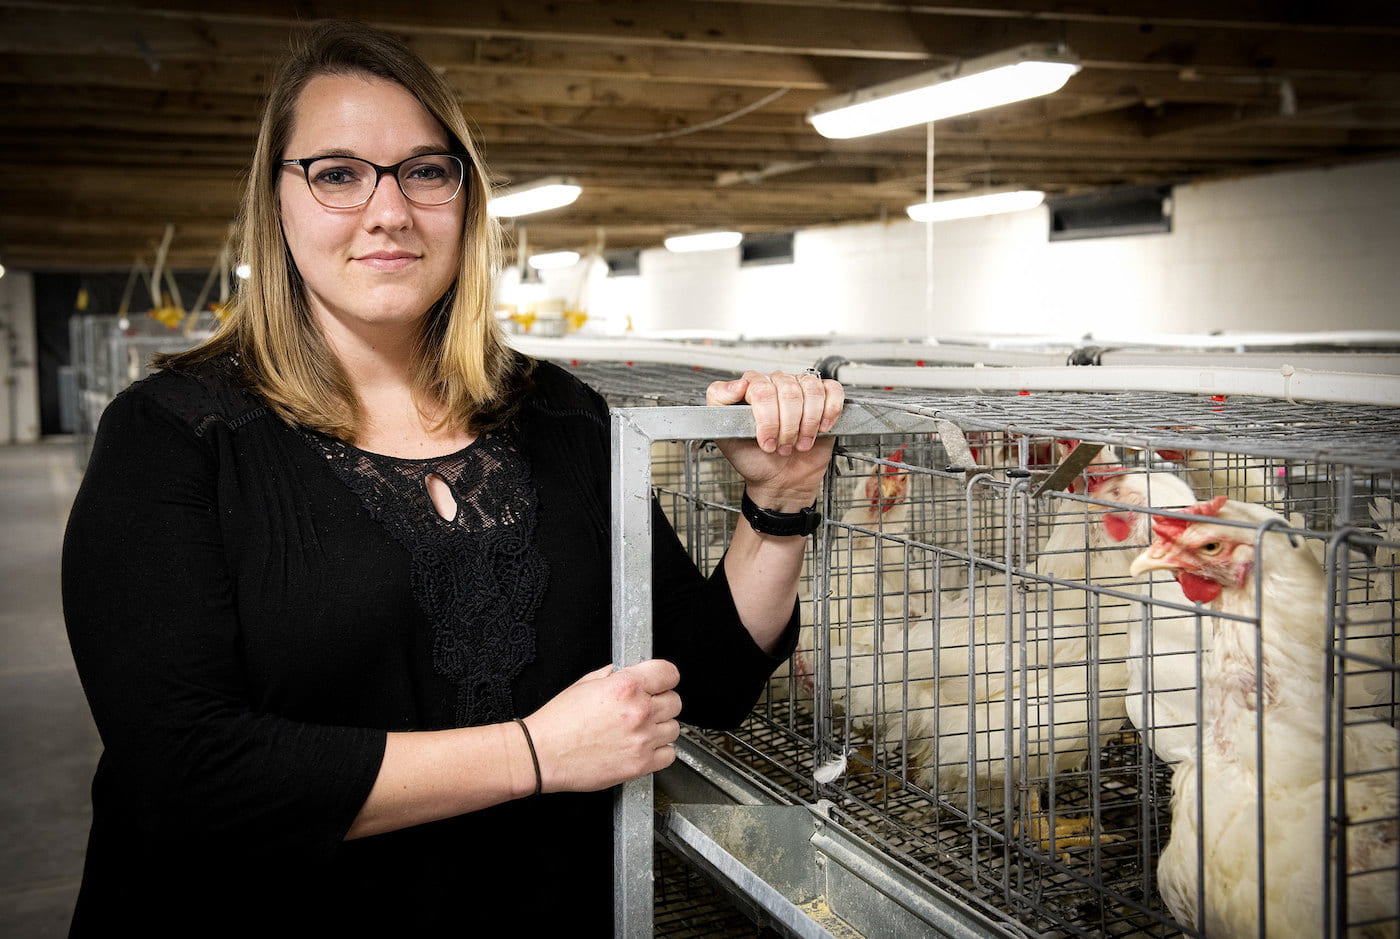 A woman, Sara Orlowski, in a black blouse with glasses stands next to chicken cages in an indoor agricultural facility, with several white chickens in the background.